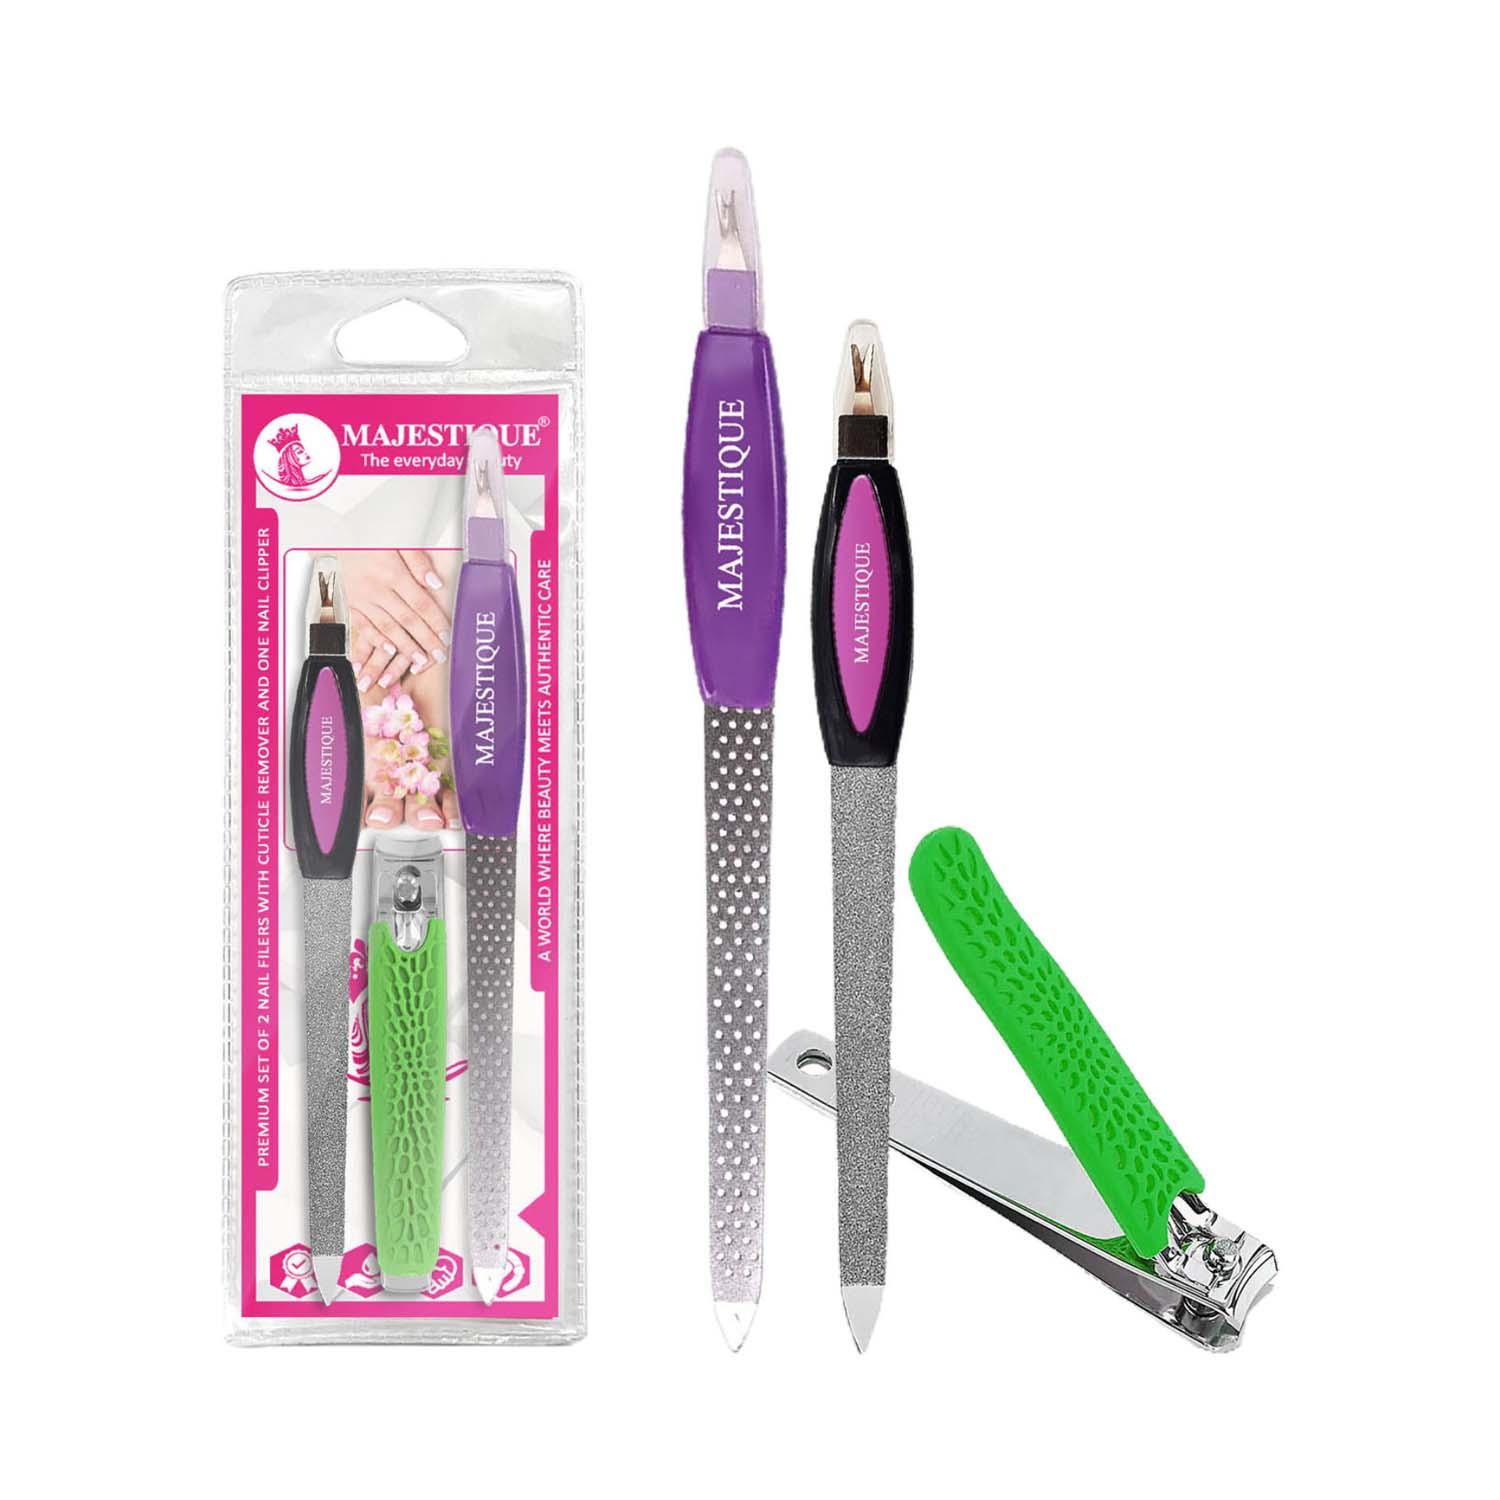 Majestique | Majestique Nail Filers with Ultra Sharp Cutter Kit (3 pcs)